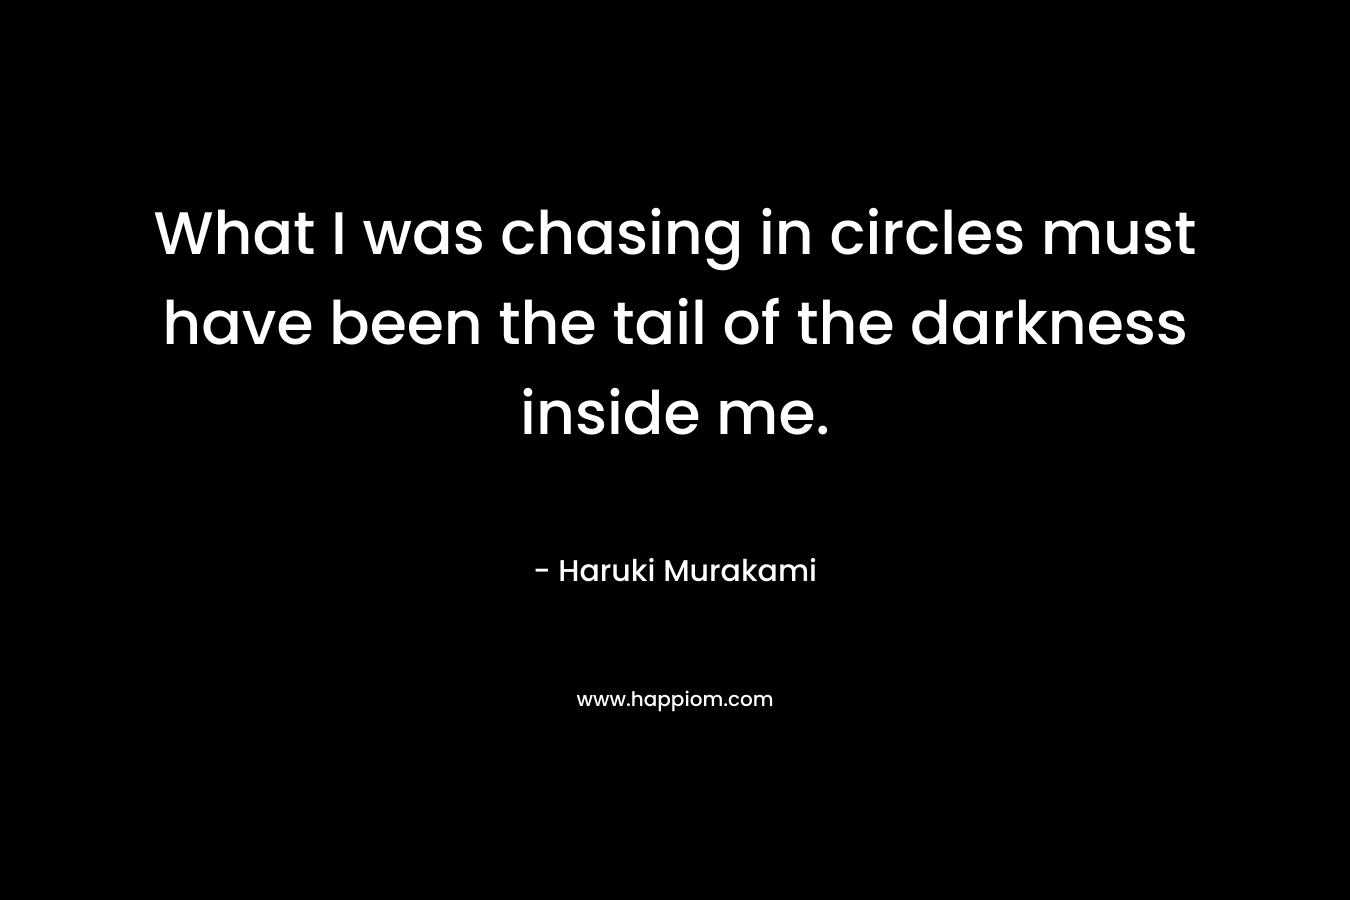 What I was chasing in circles must have been the tail of the darkness inside me. – Haruki Murakami